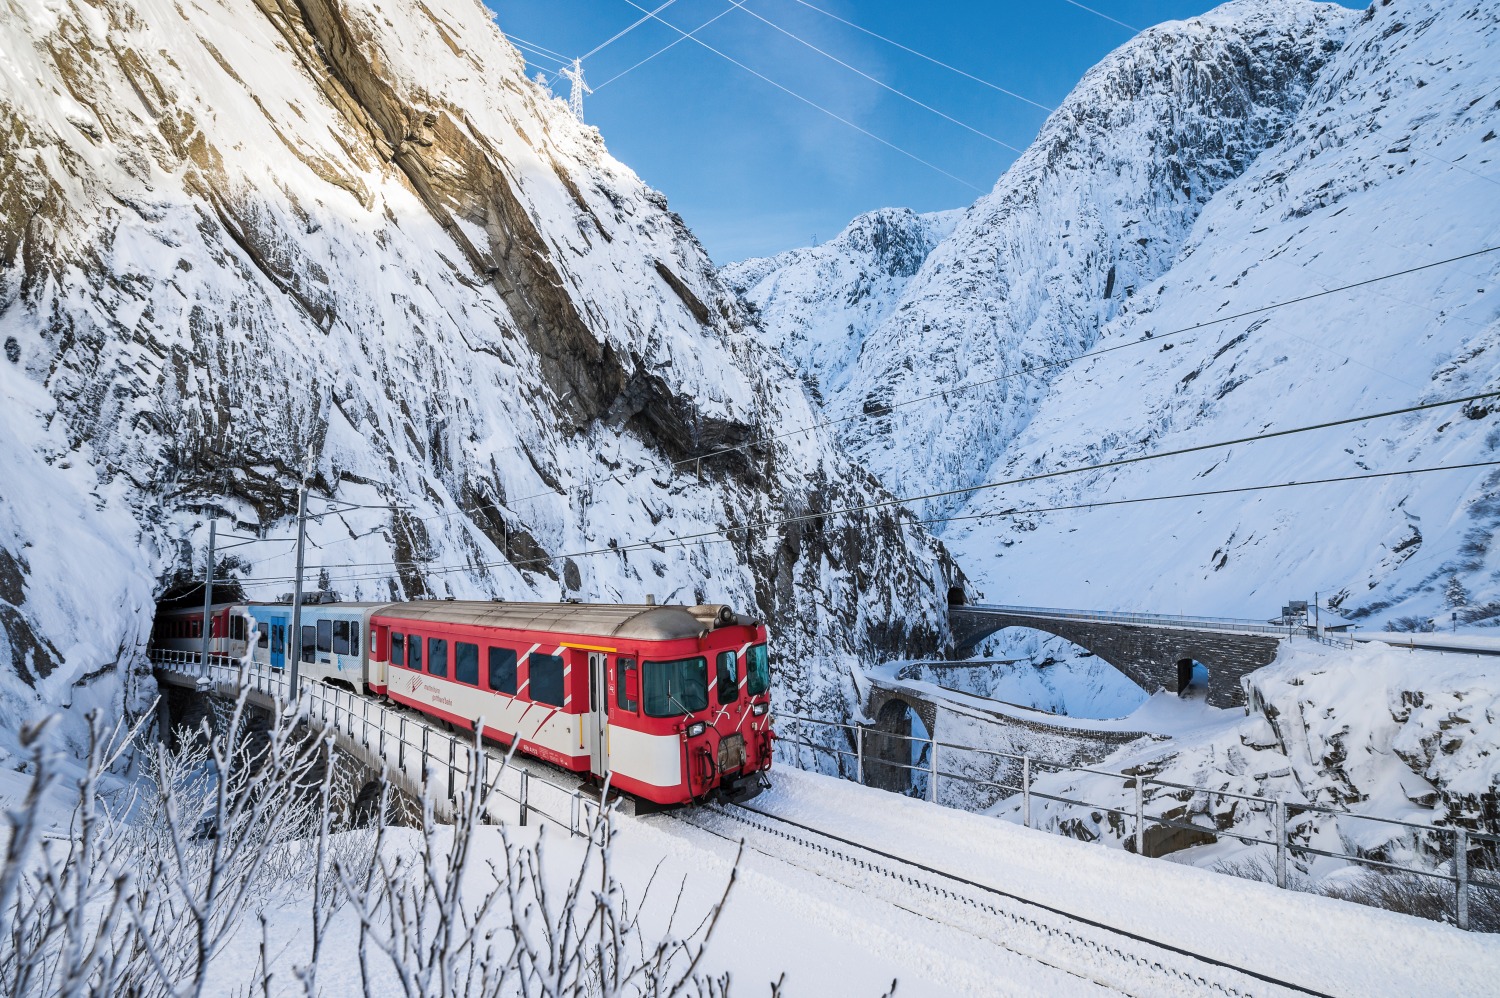 Train coming from snow covered mountain